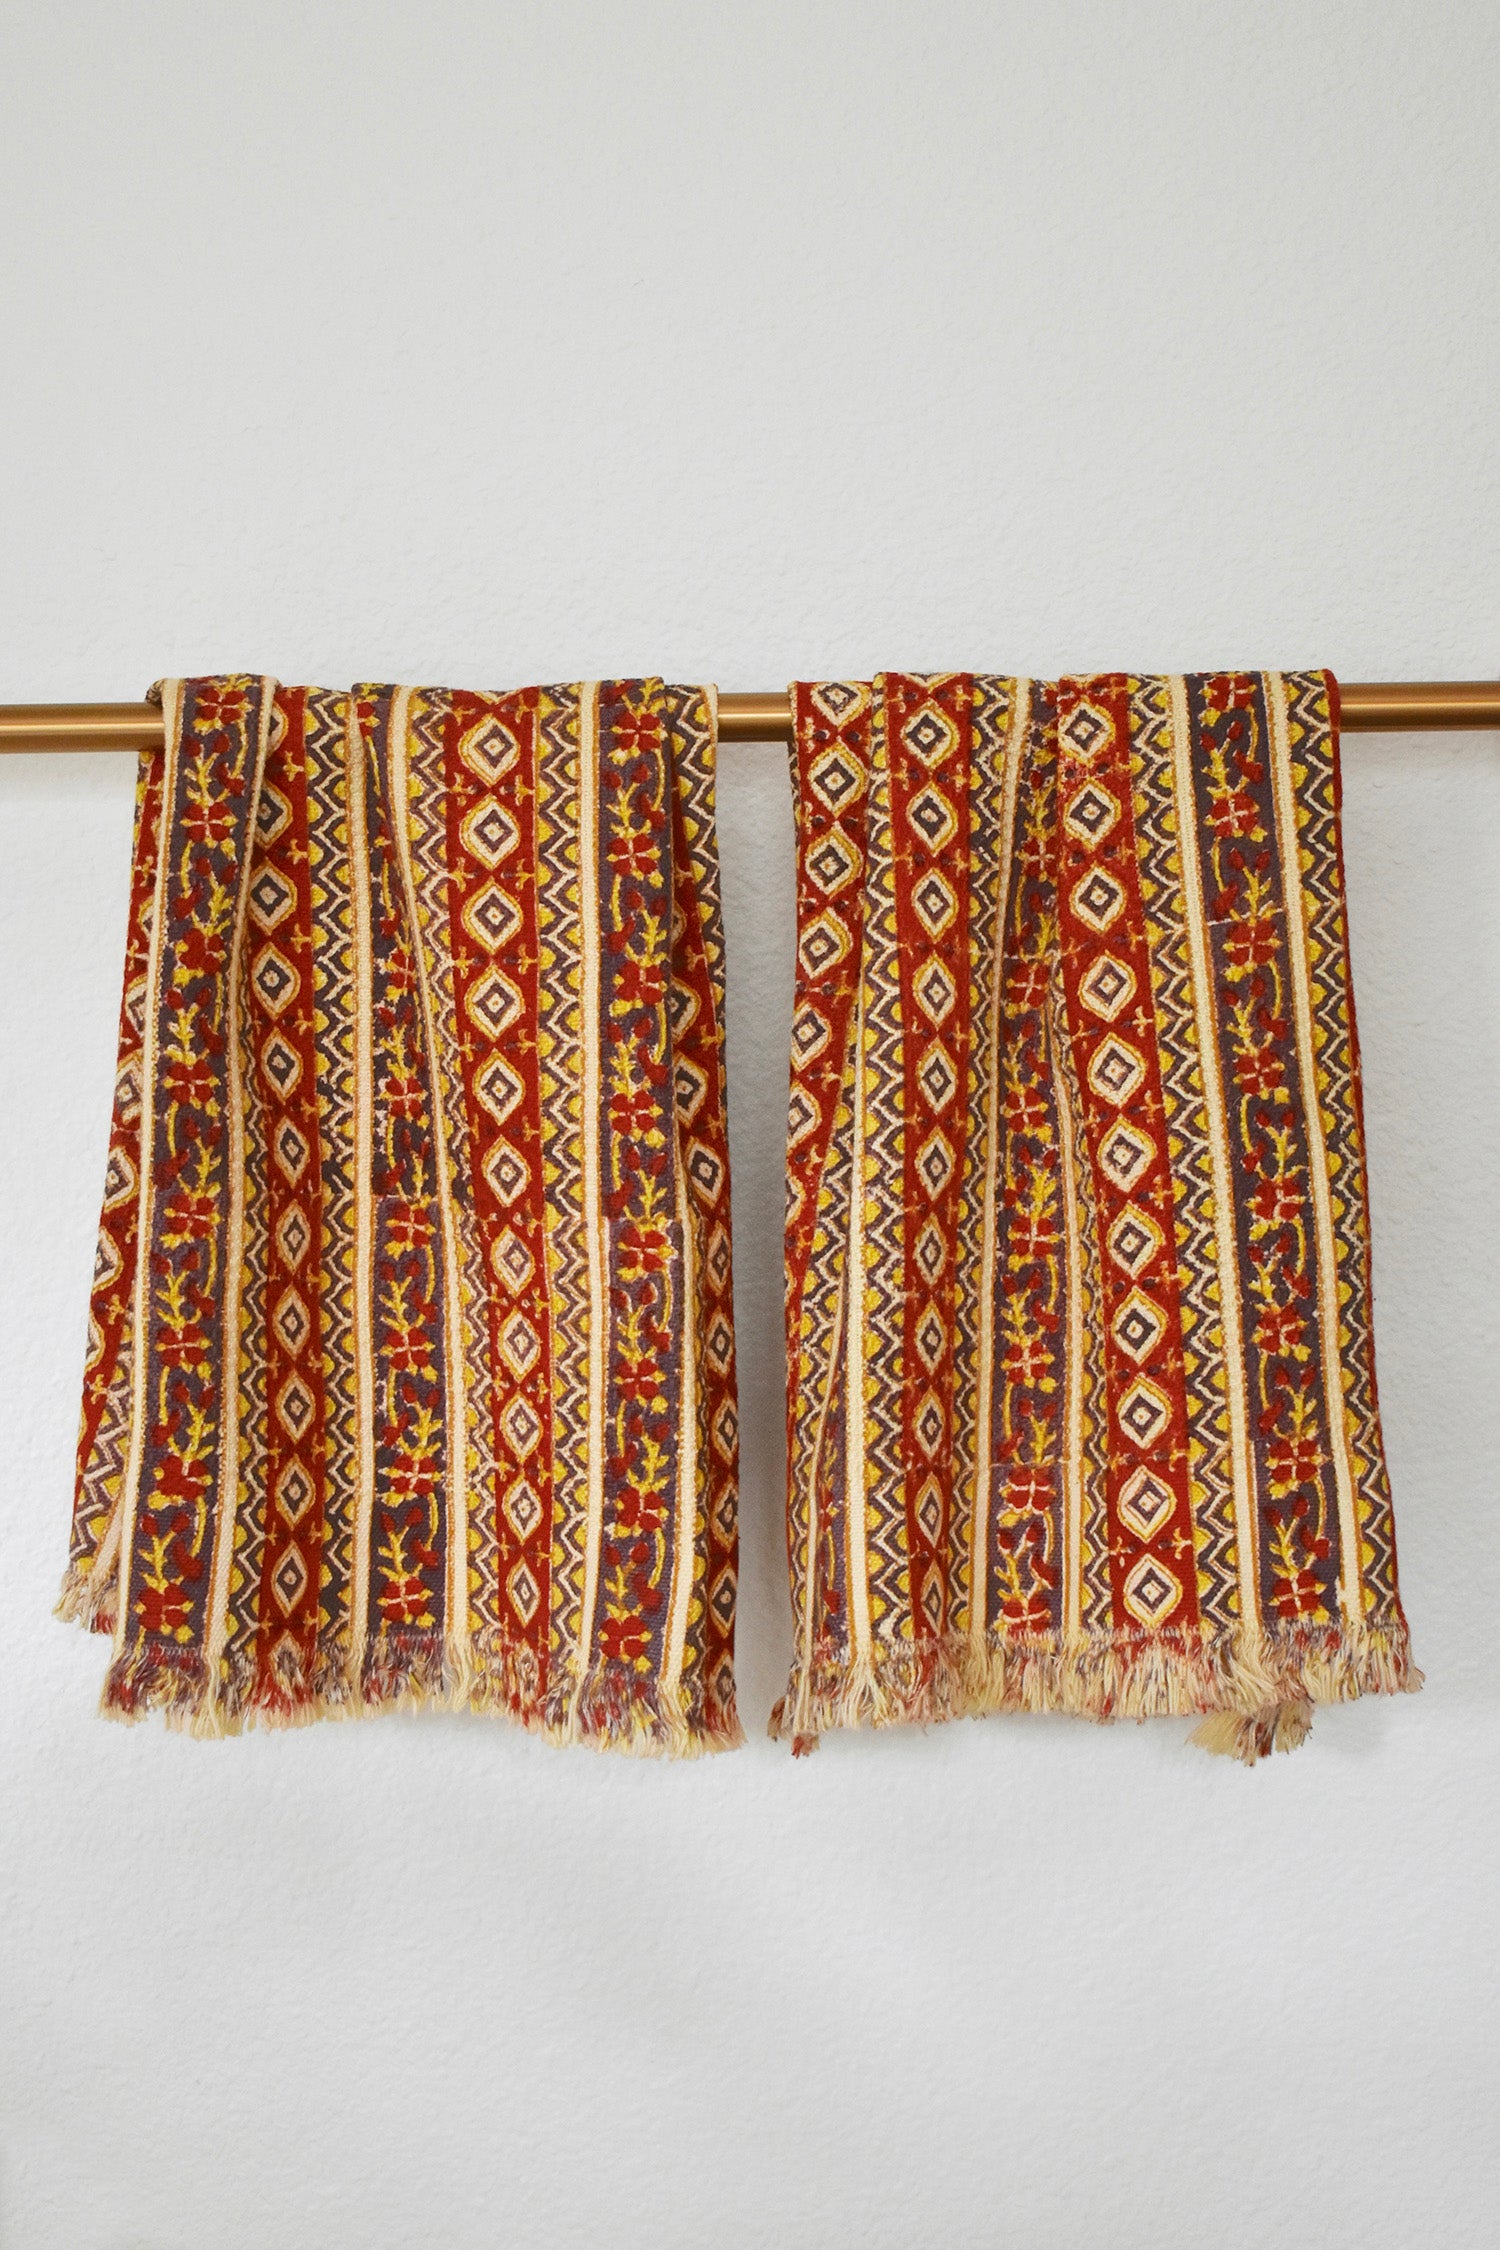 Two Camila block printed khadi cotton hand towels hanging on a gold bathroom rod